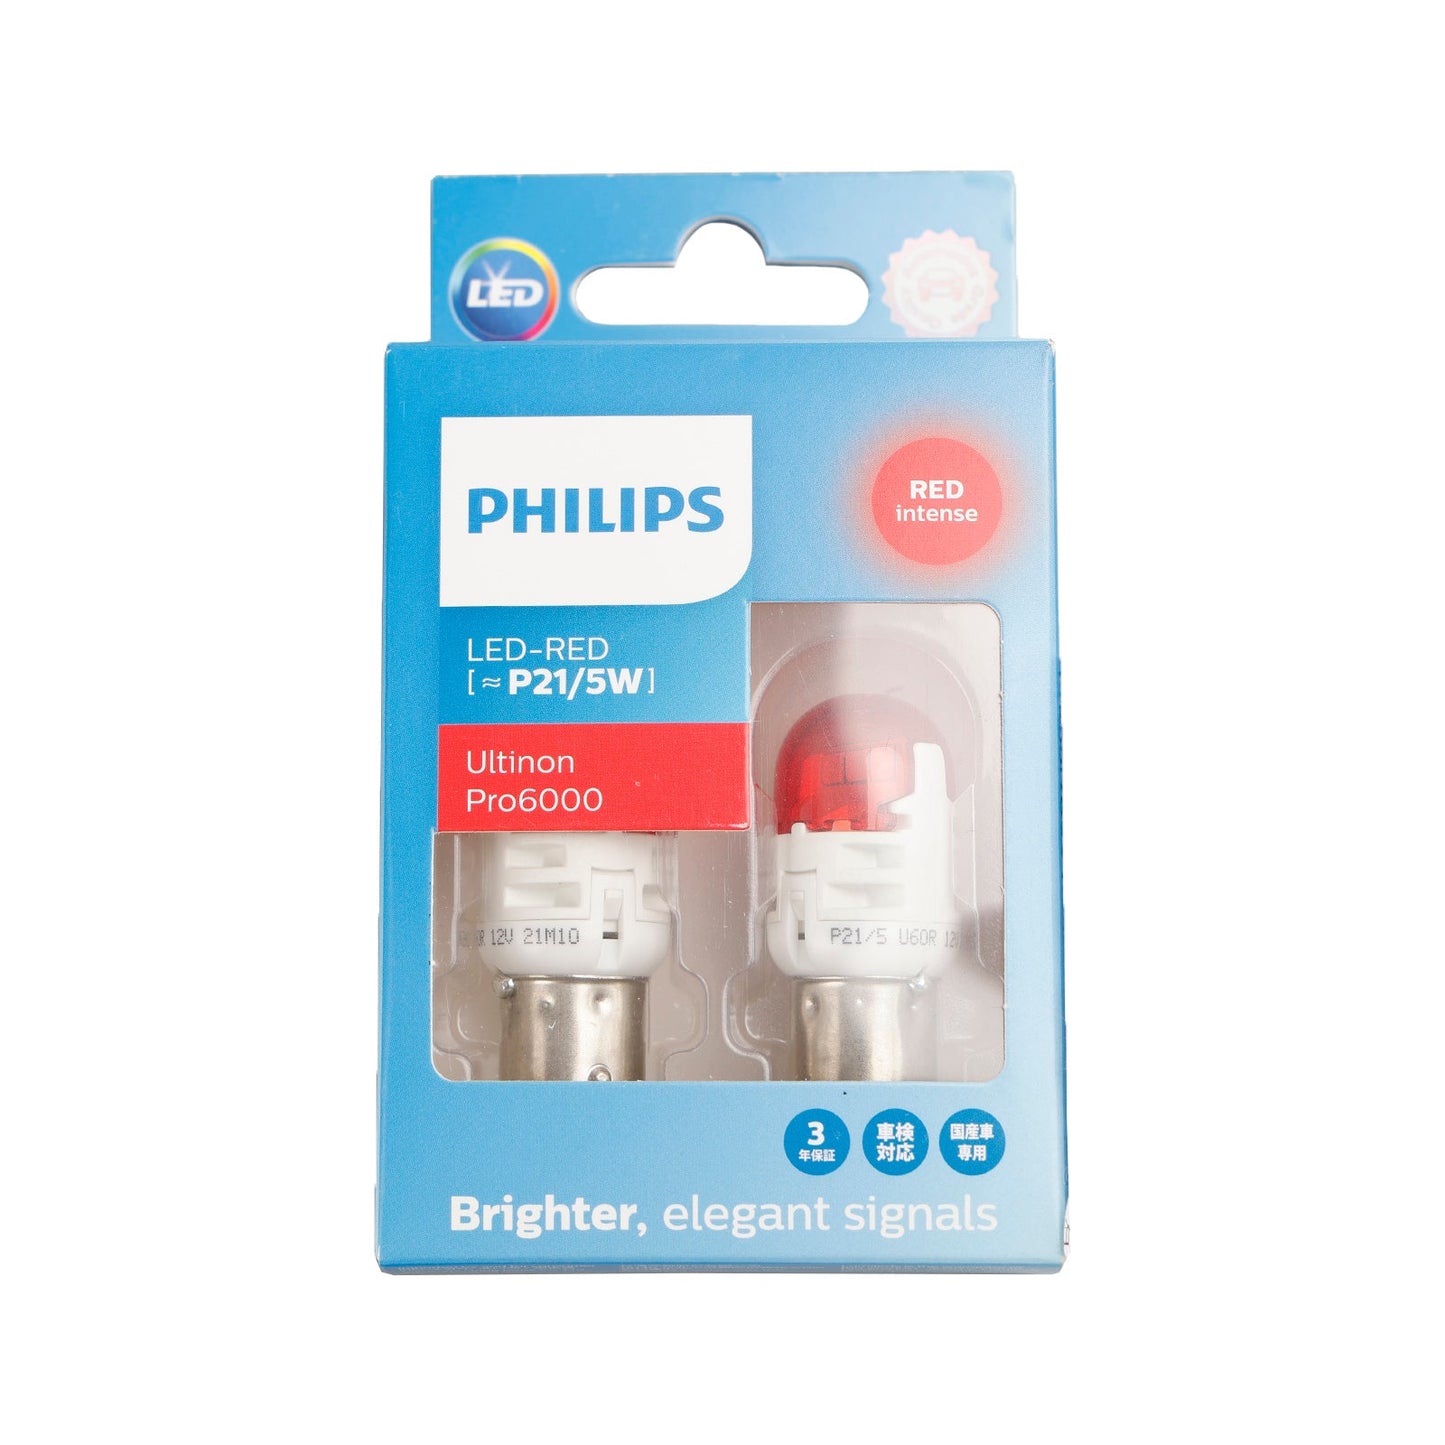 Für Philips 11499RU60X2 Ultinon Pro6000 LED-ROT P21/5W intensives Rot 75/15lm